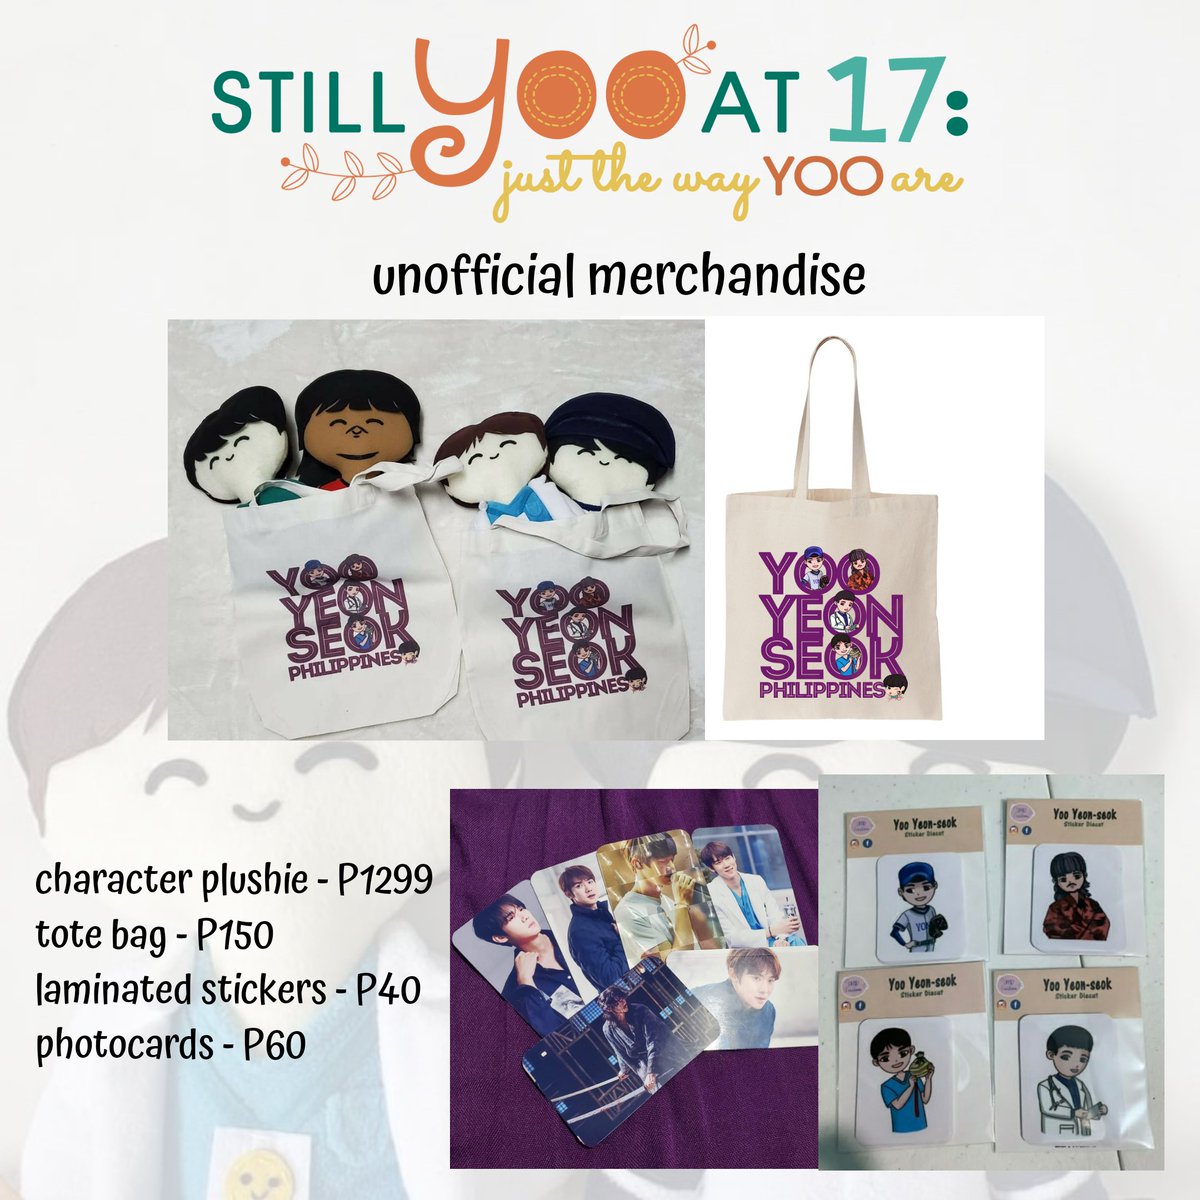 You can purchase separately or have it in sets, depending on the amount contributed.  #StillYOOAt17  #YooYeonSeok  #YOOnifiedPH  #FanSupport